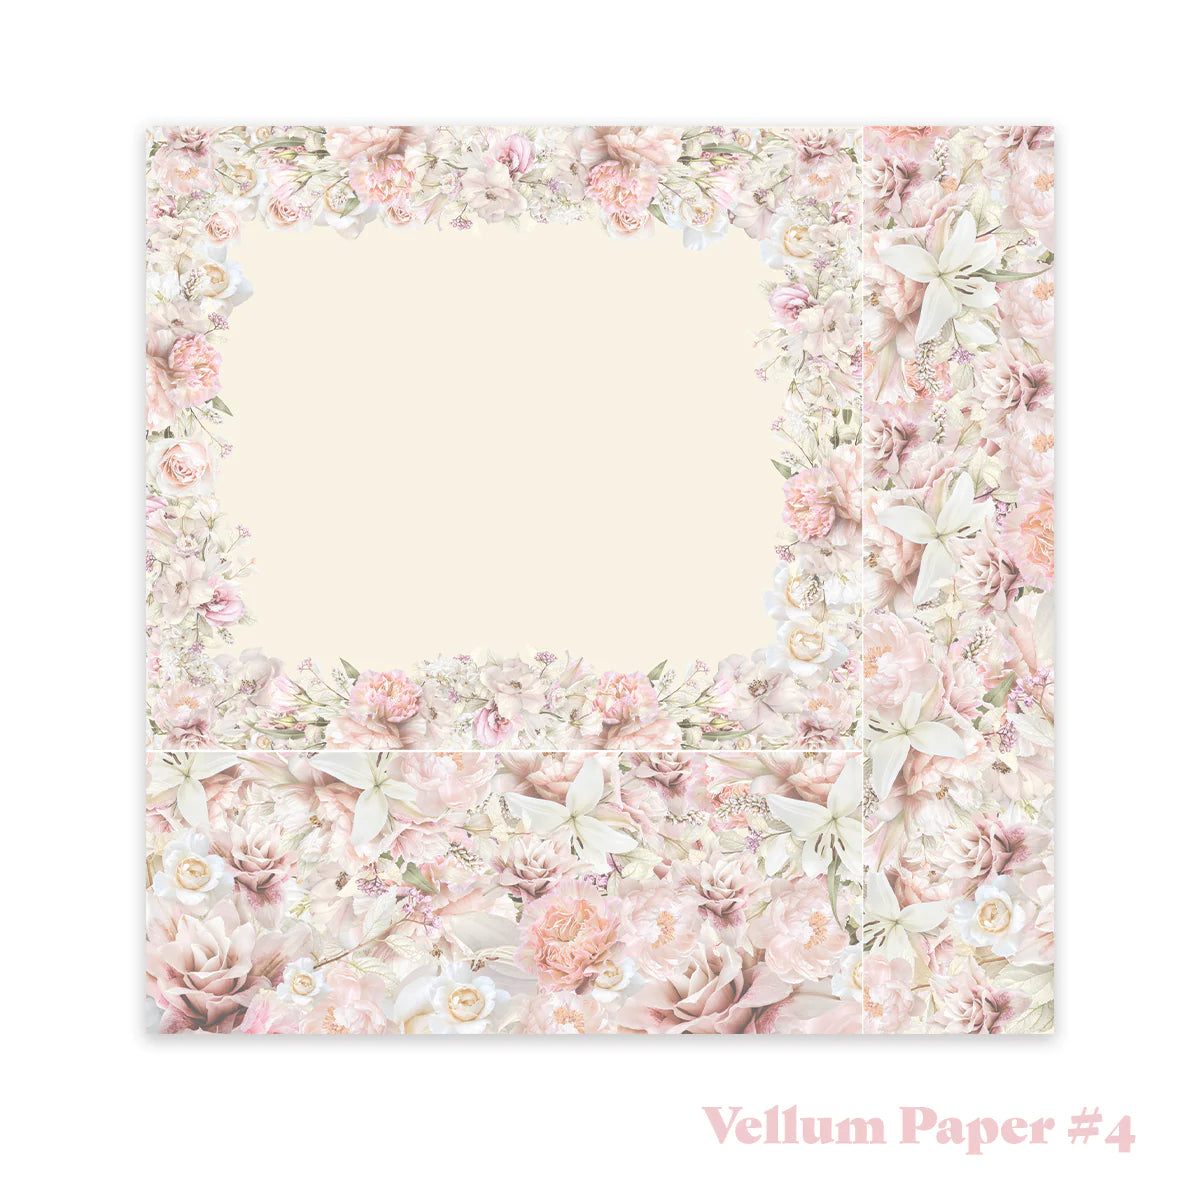 Vintage Tea Collection - 8in x 8in Vellum Paper